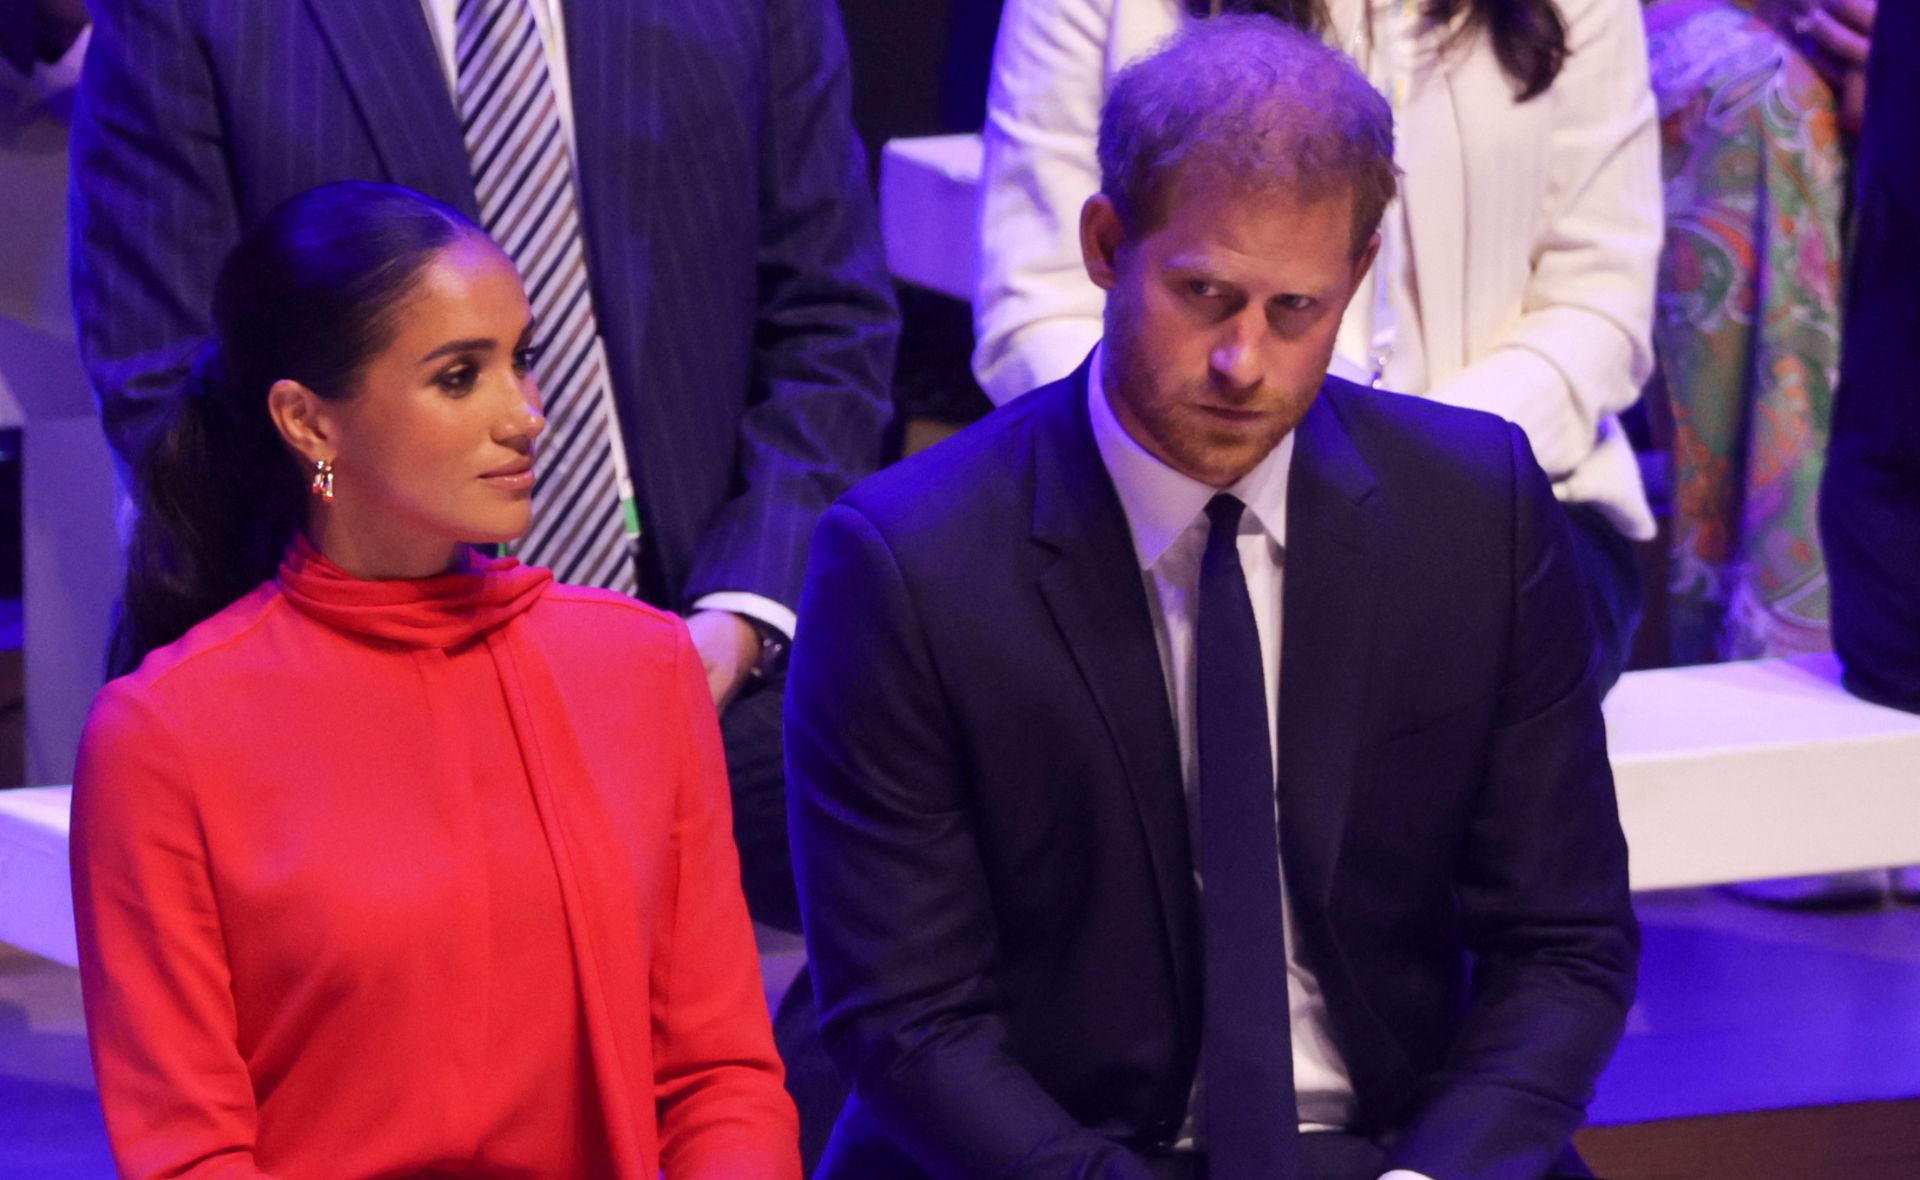 Why Meghan Markle and Prince Harry’s return to the UK has been a big fail, according to royal experts